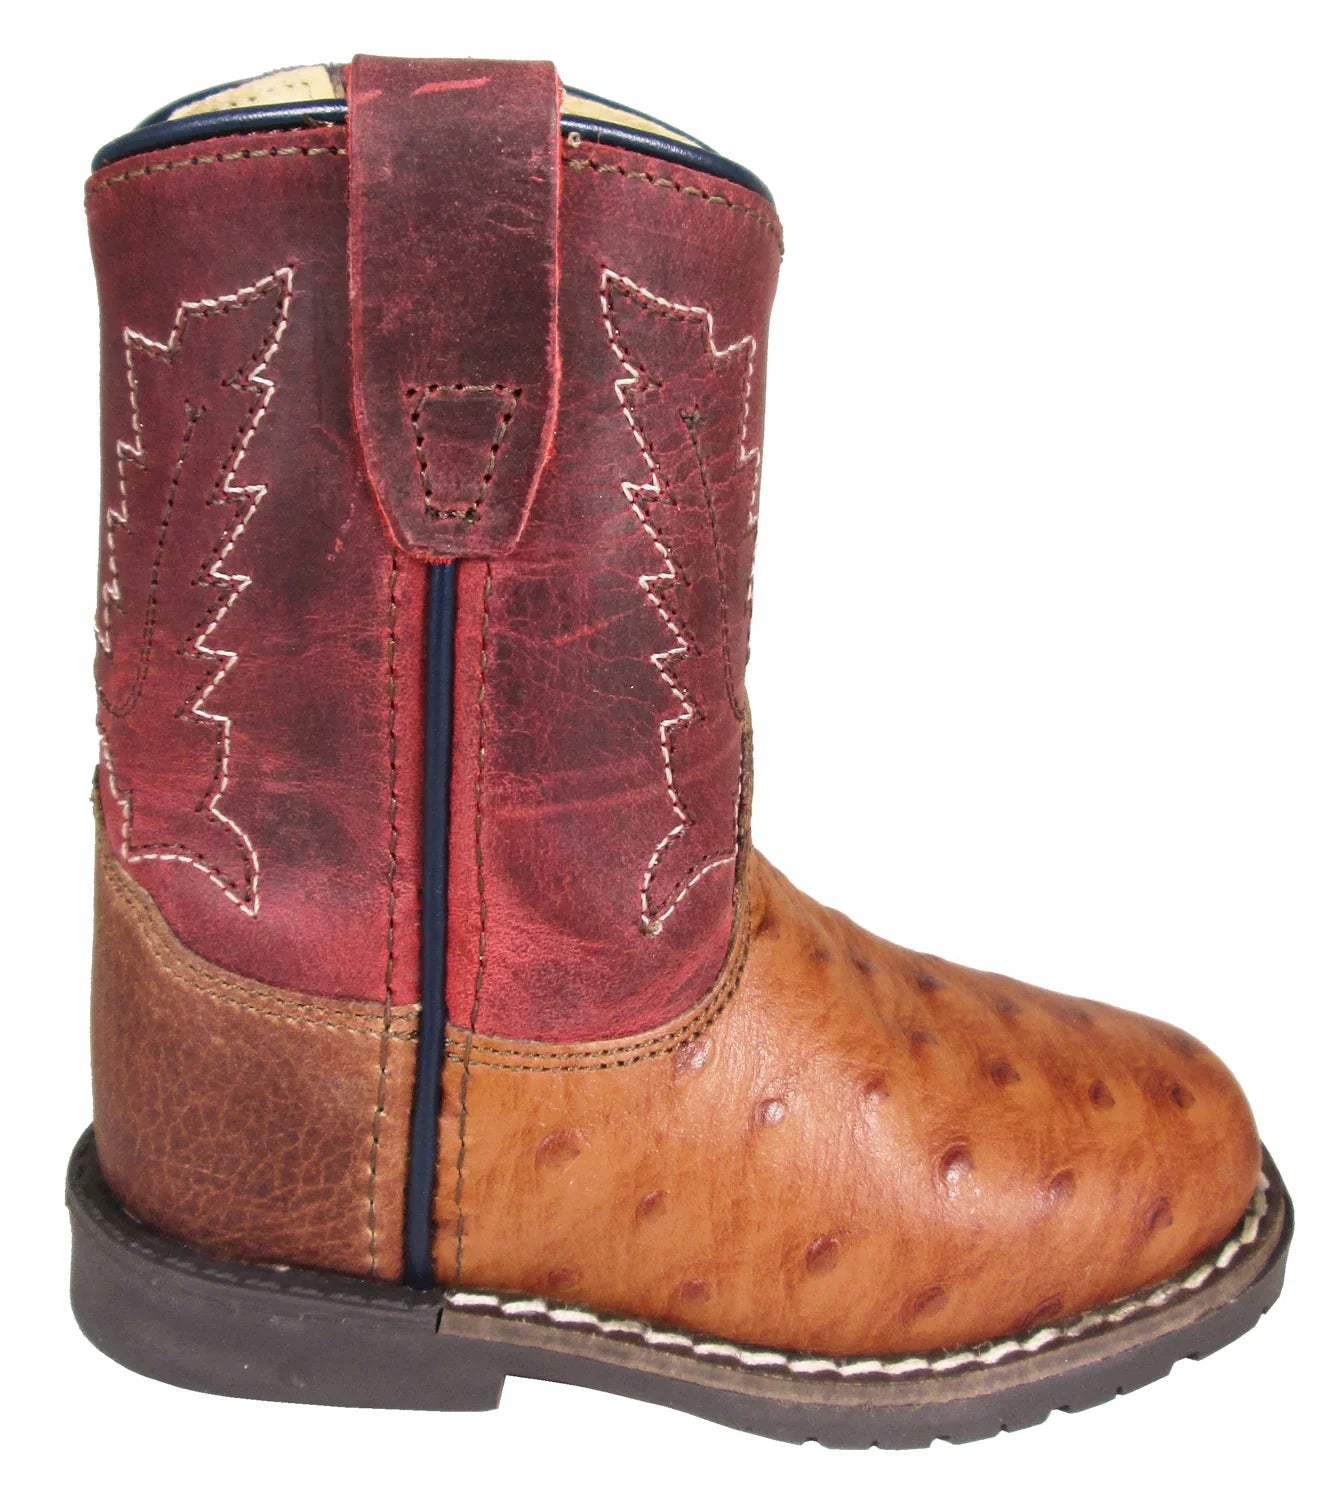 Smoky Mountain Infant Cognac & Burgundy Ostrich Print Boot STYLE 3057T